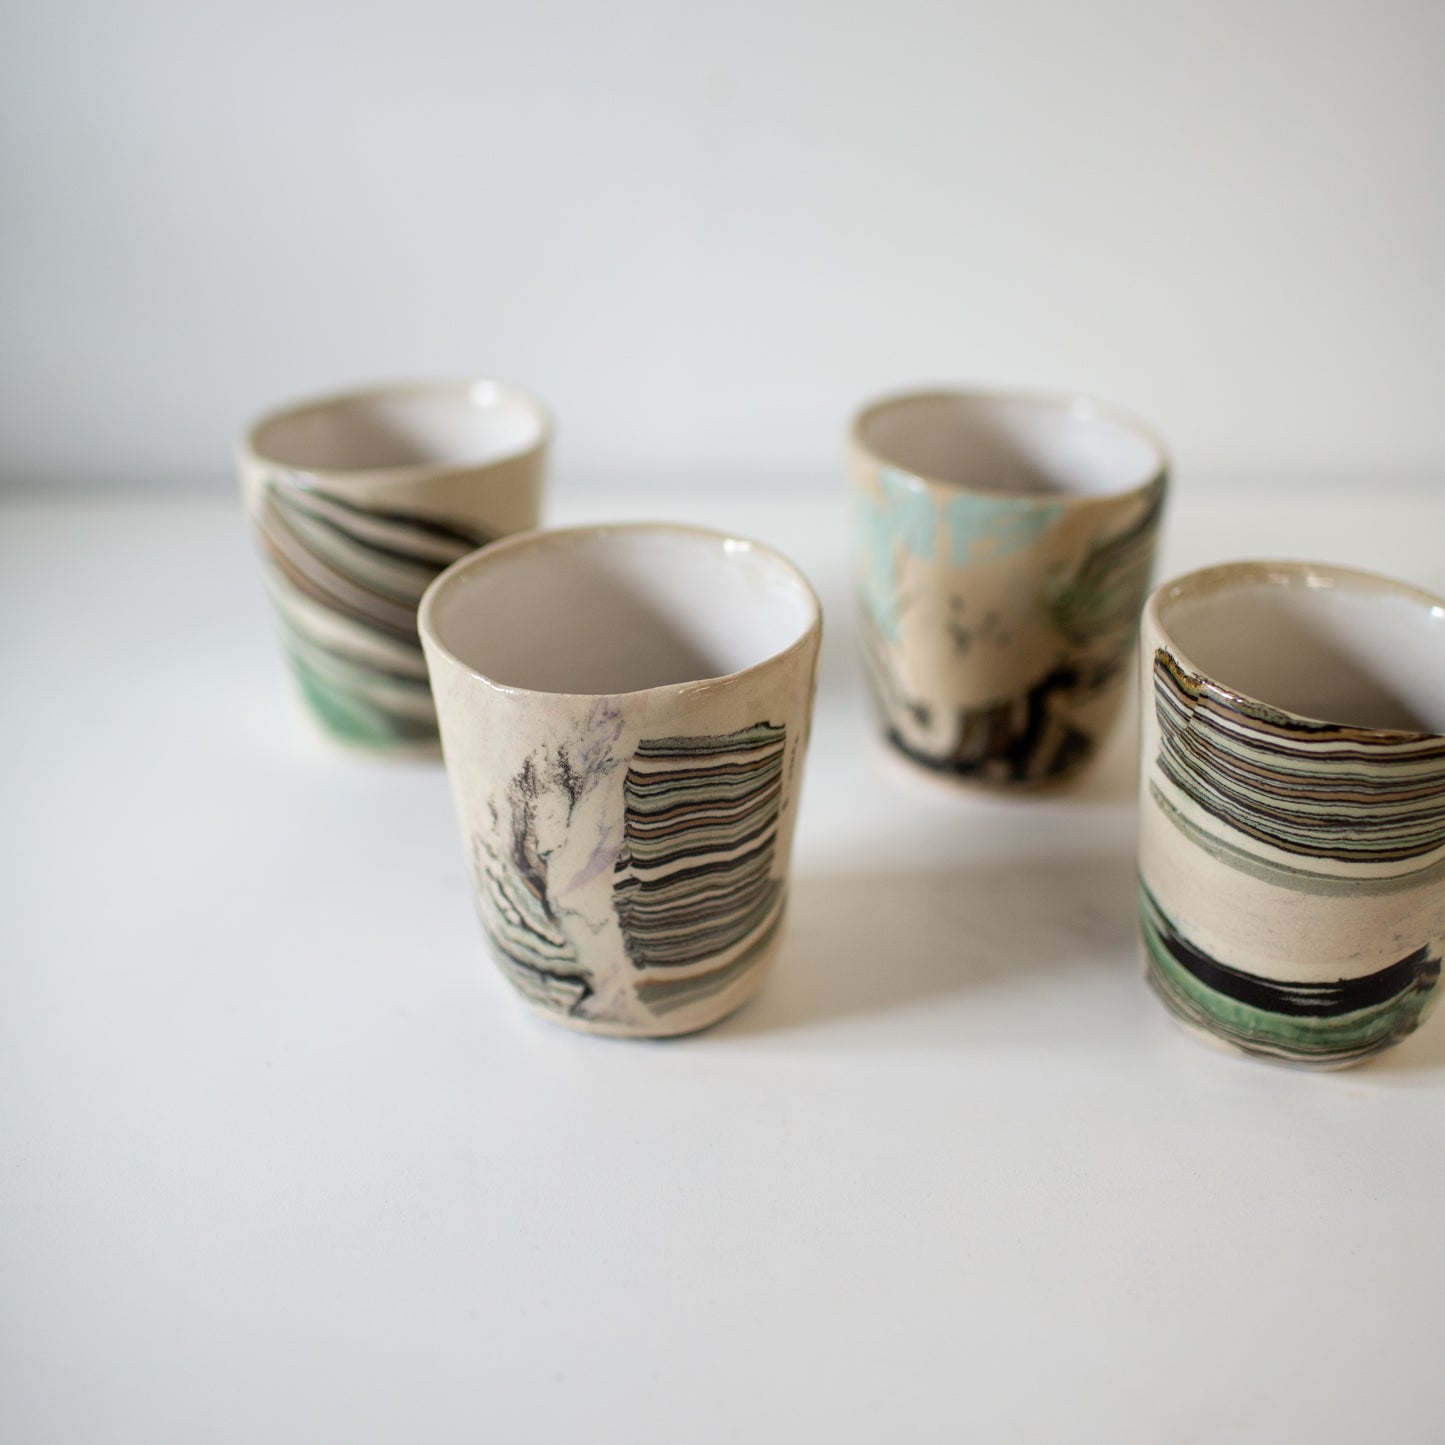 ‘Up the Cliff’ tumblers